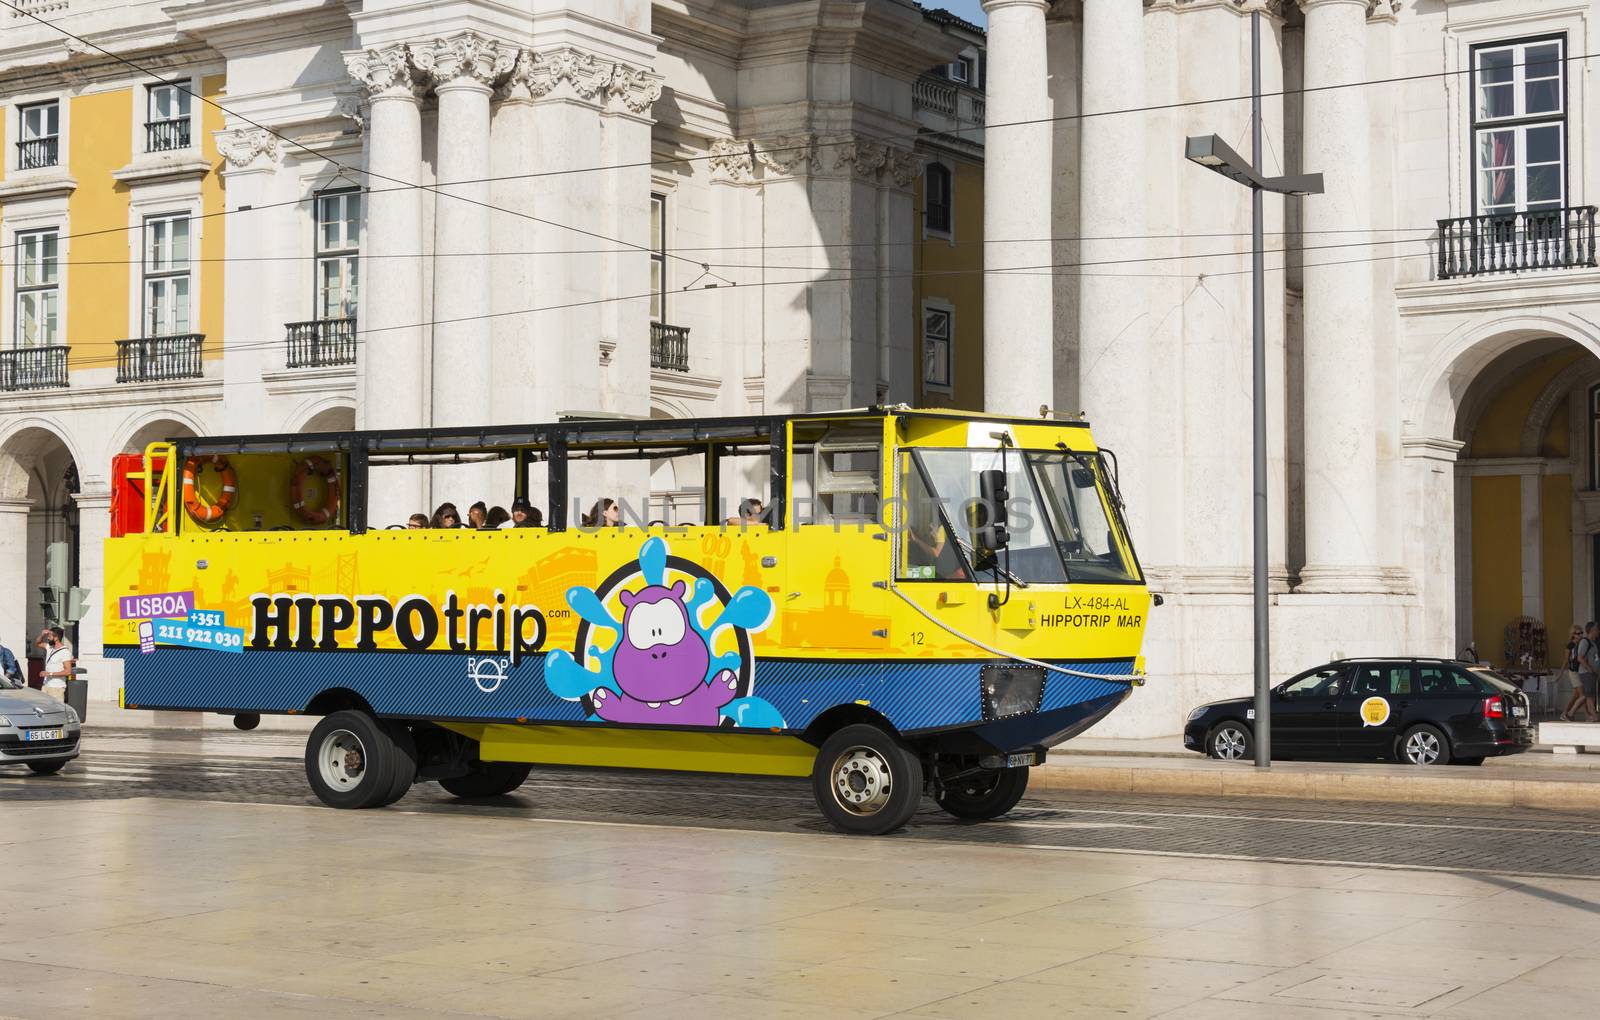 hippotrip bus in Lissabon by compuinfoto